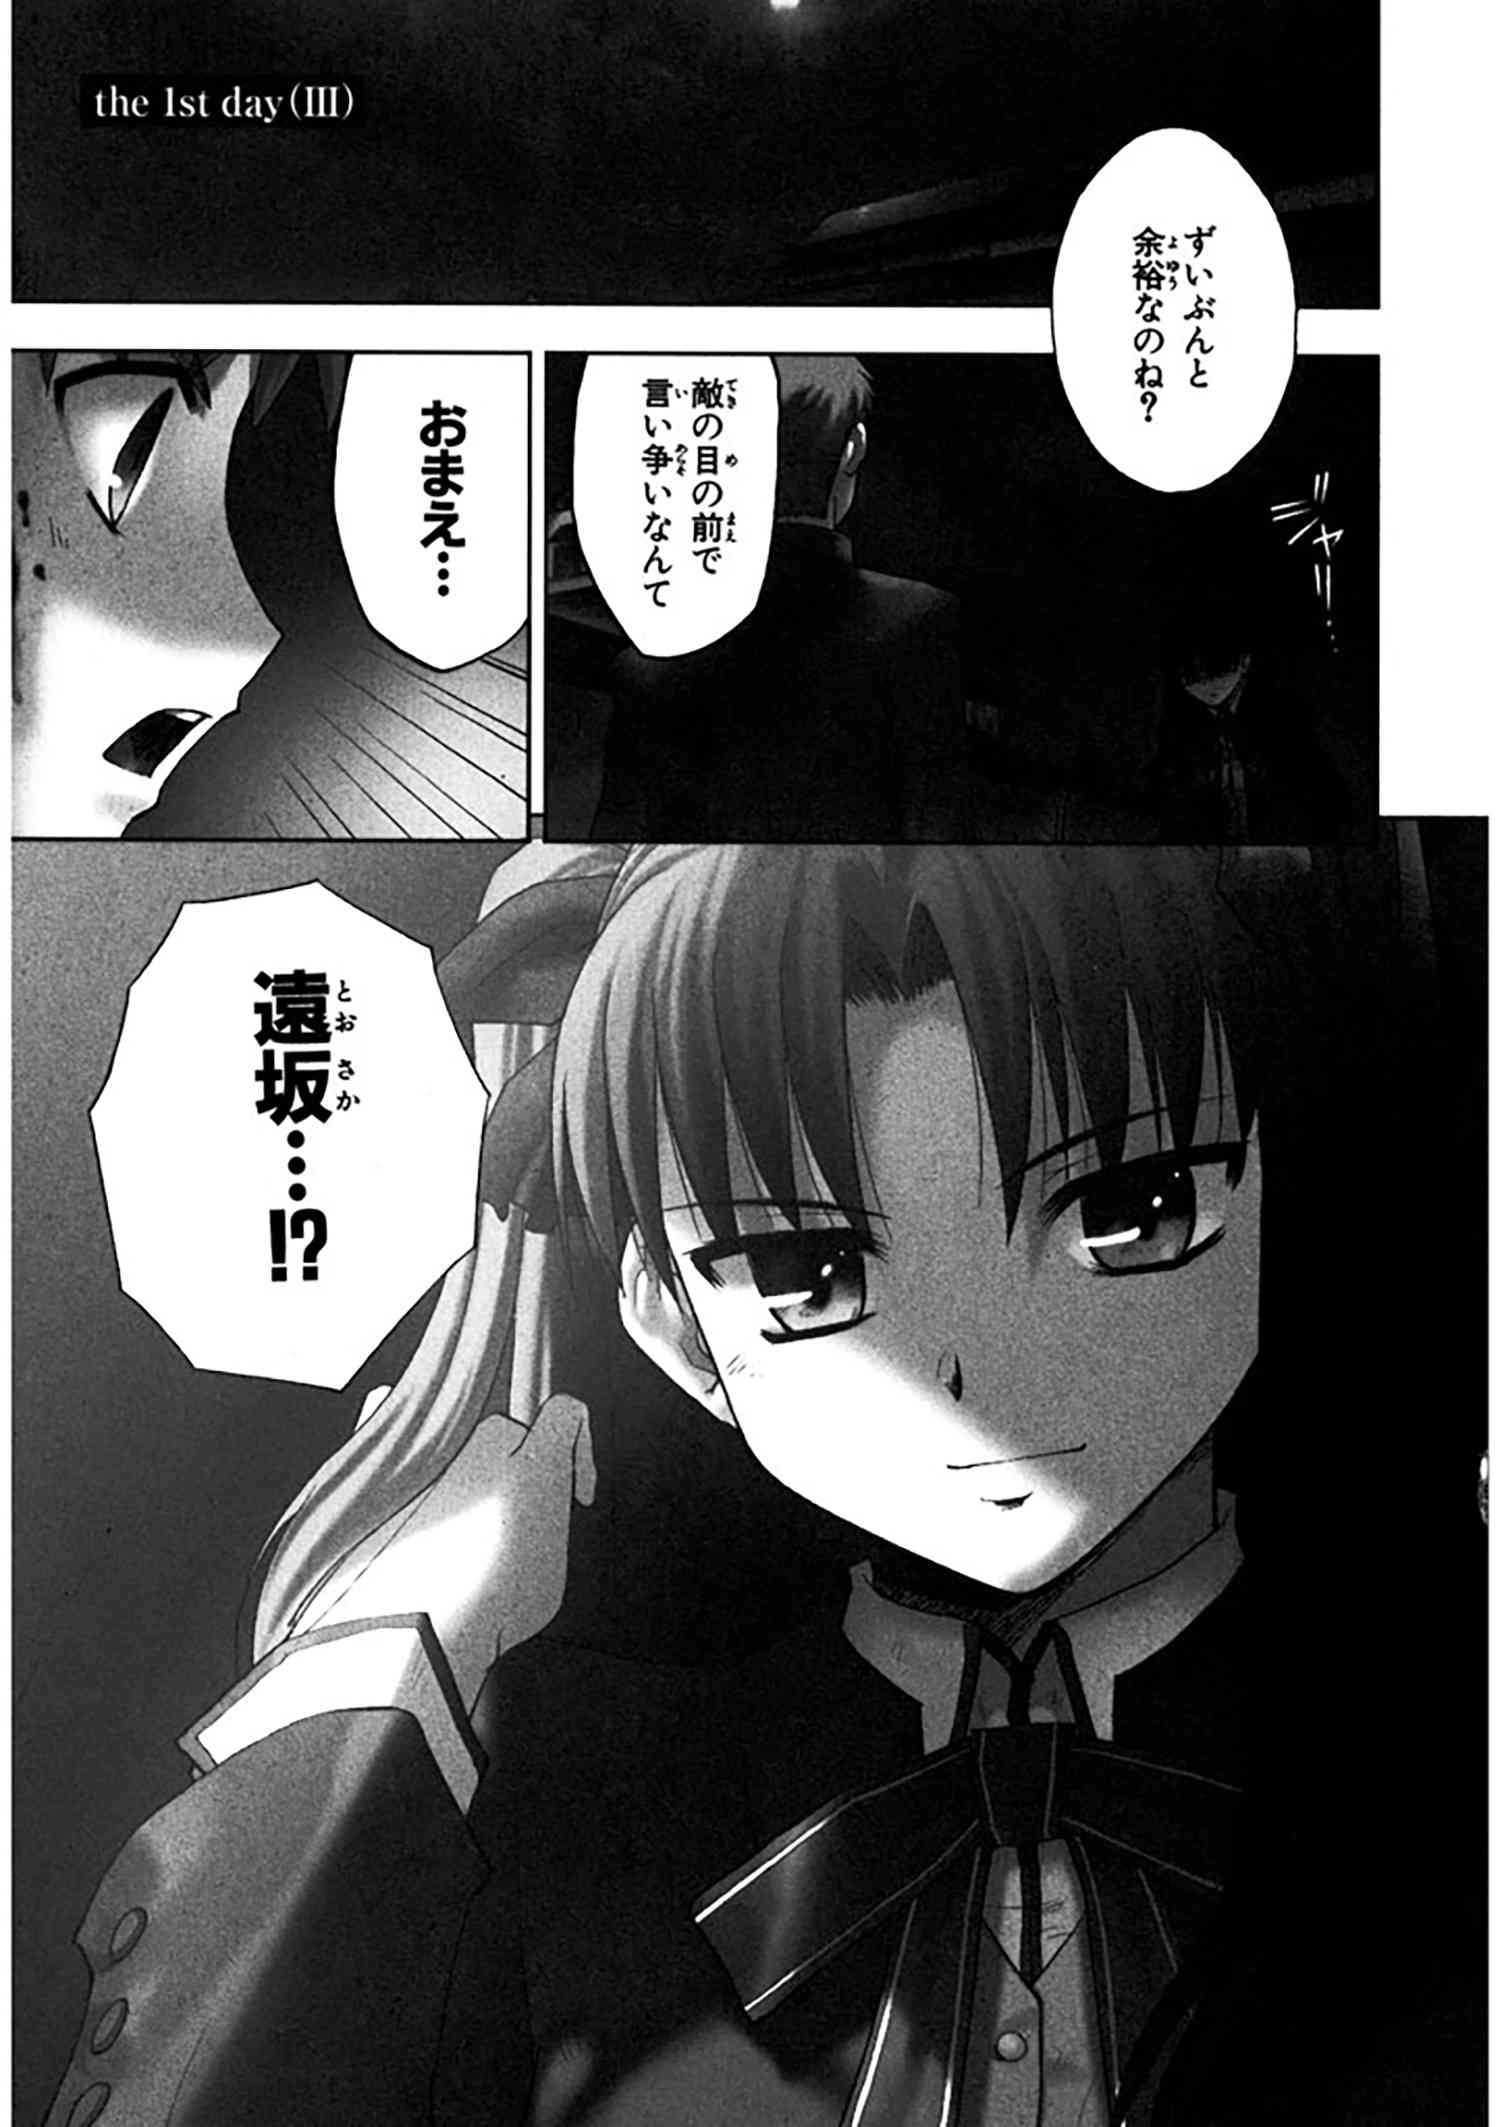 Fate Stay Night 第3話 The 1st Day Type Moonコミックエース 無料で漫画が読めるオンラインマガジン